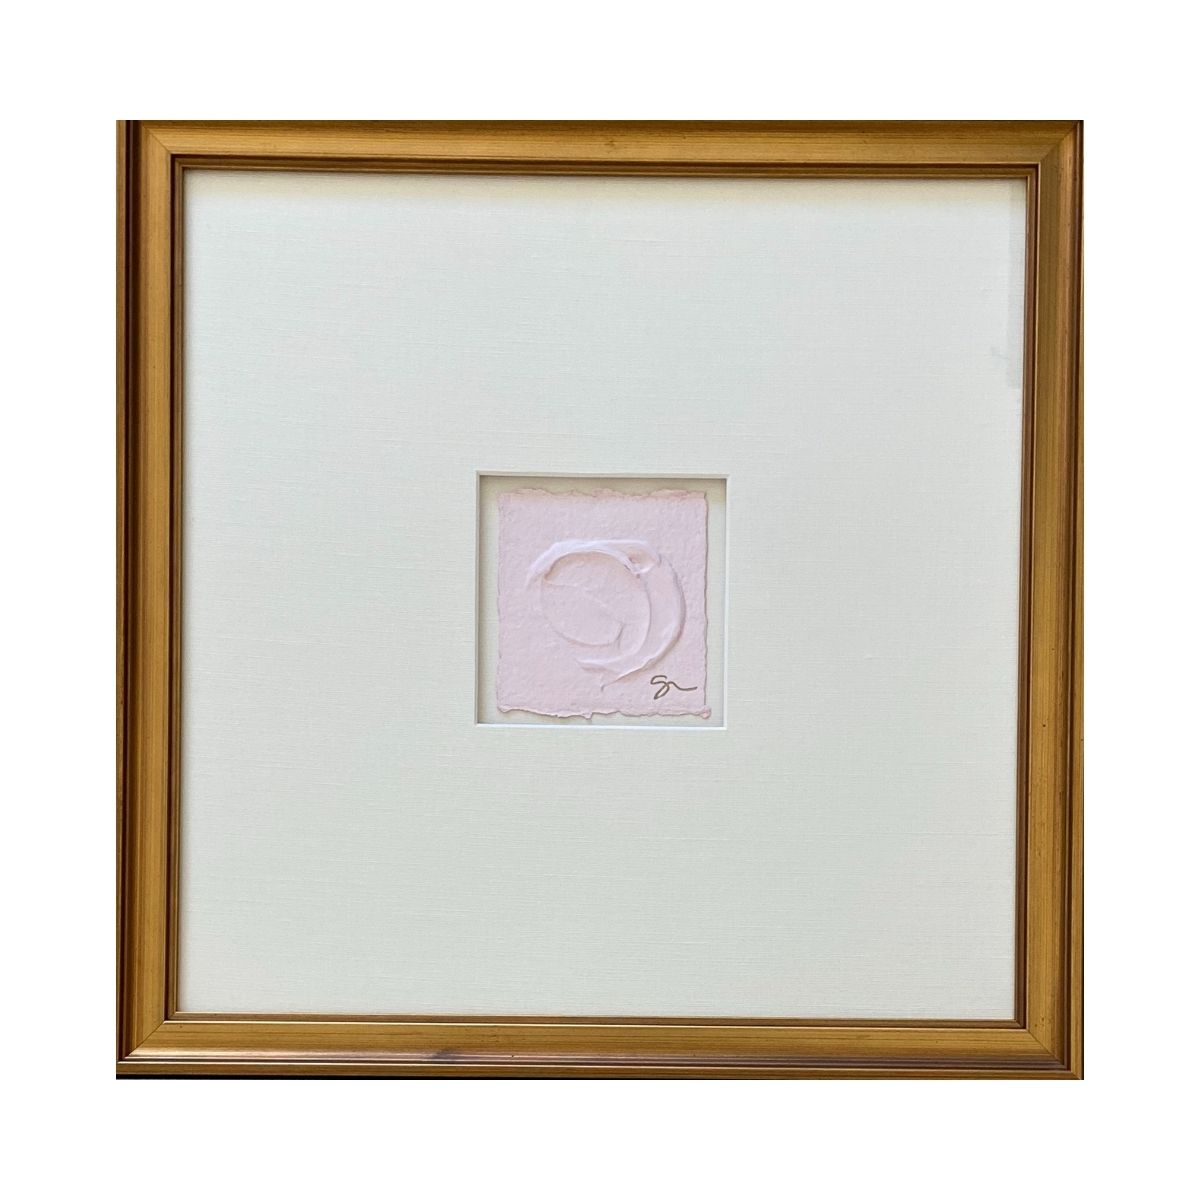 "Square Studies", Pink Ombre #2 by Sally Threlkeld